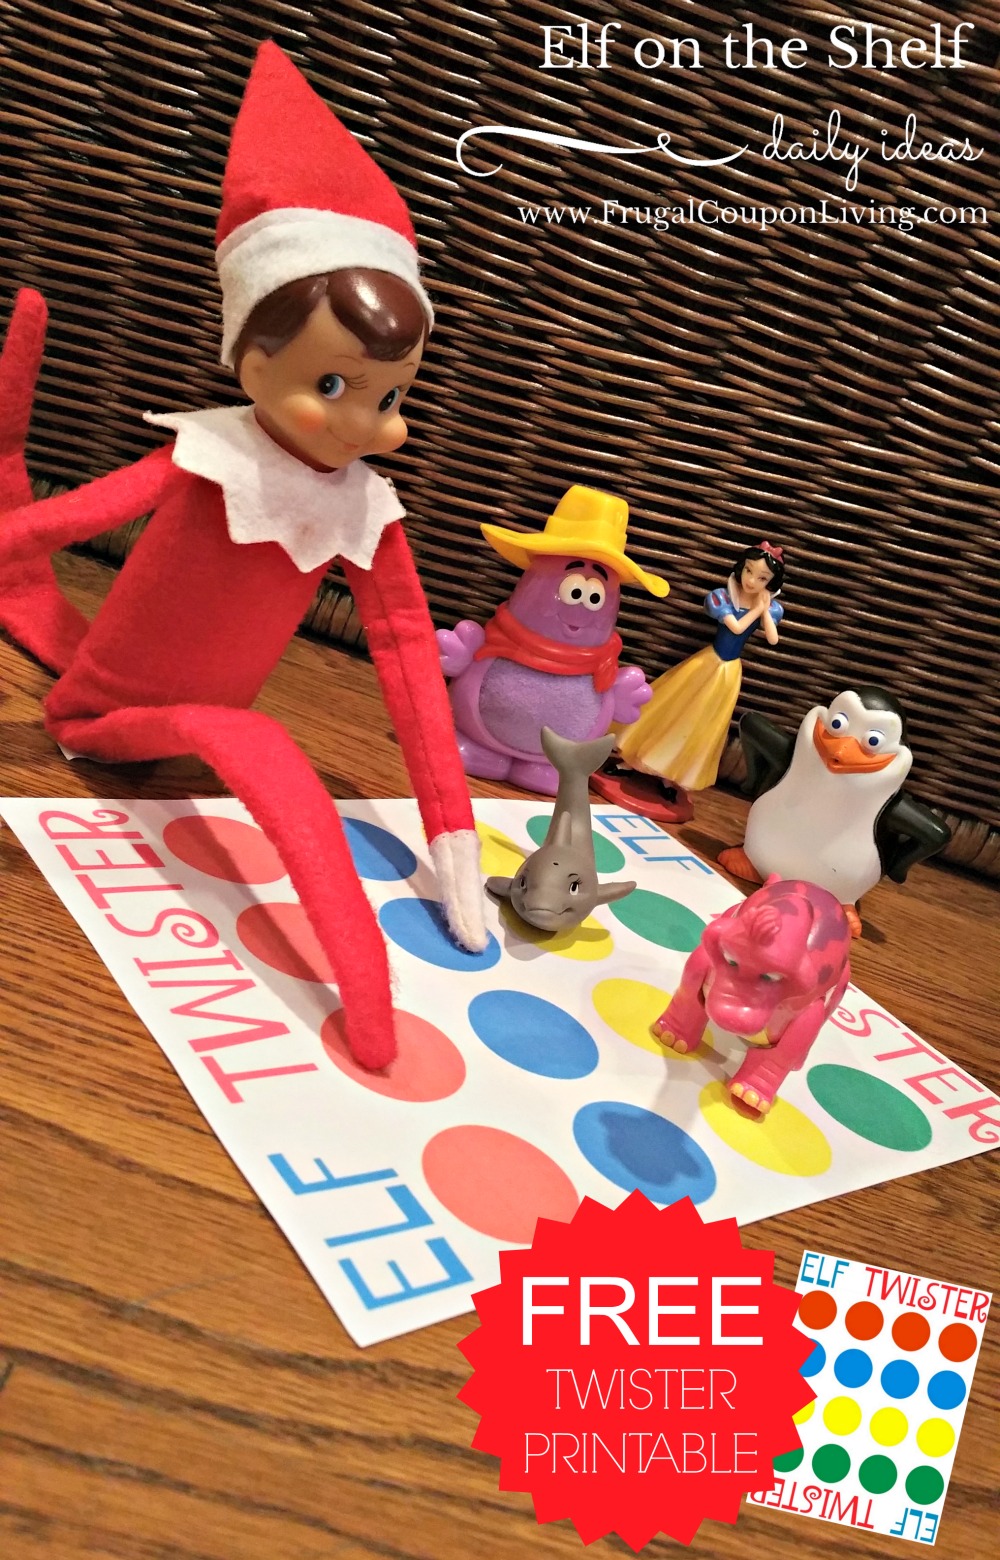 http://www.frugalcouponliving.com/2015/11/20/elf-on-the-shelf-ideas-elf-twister-printable/